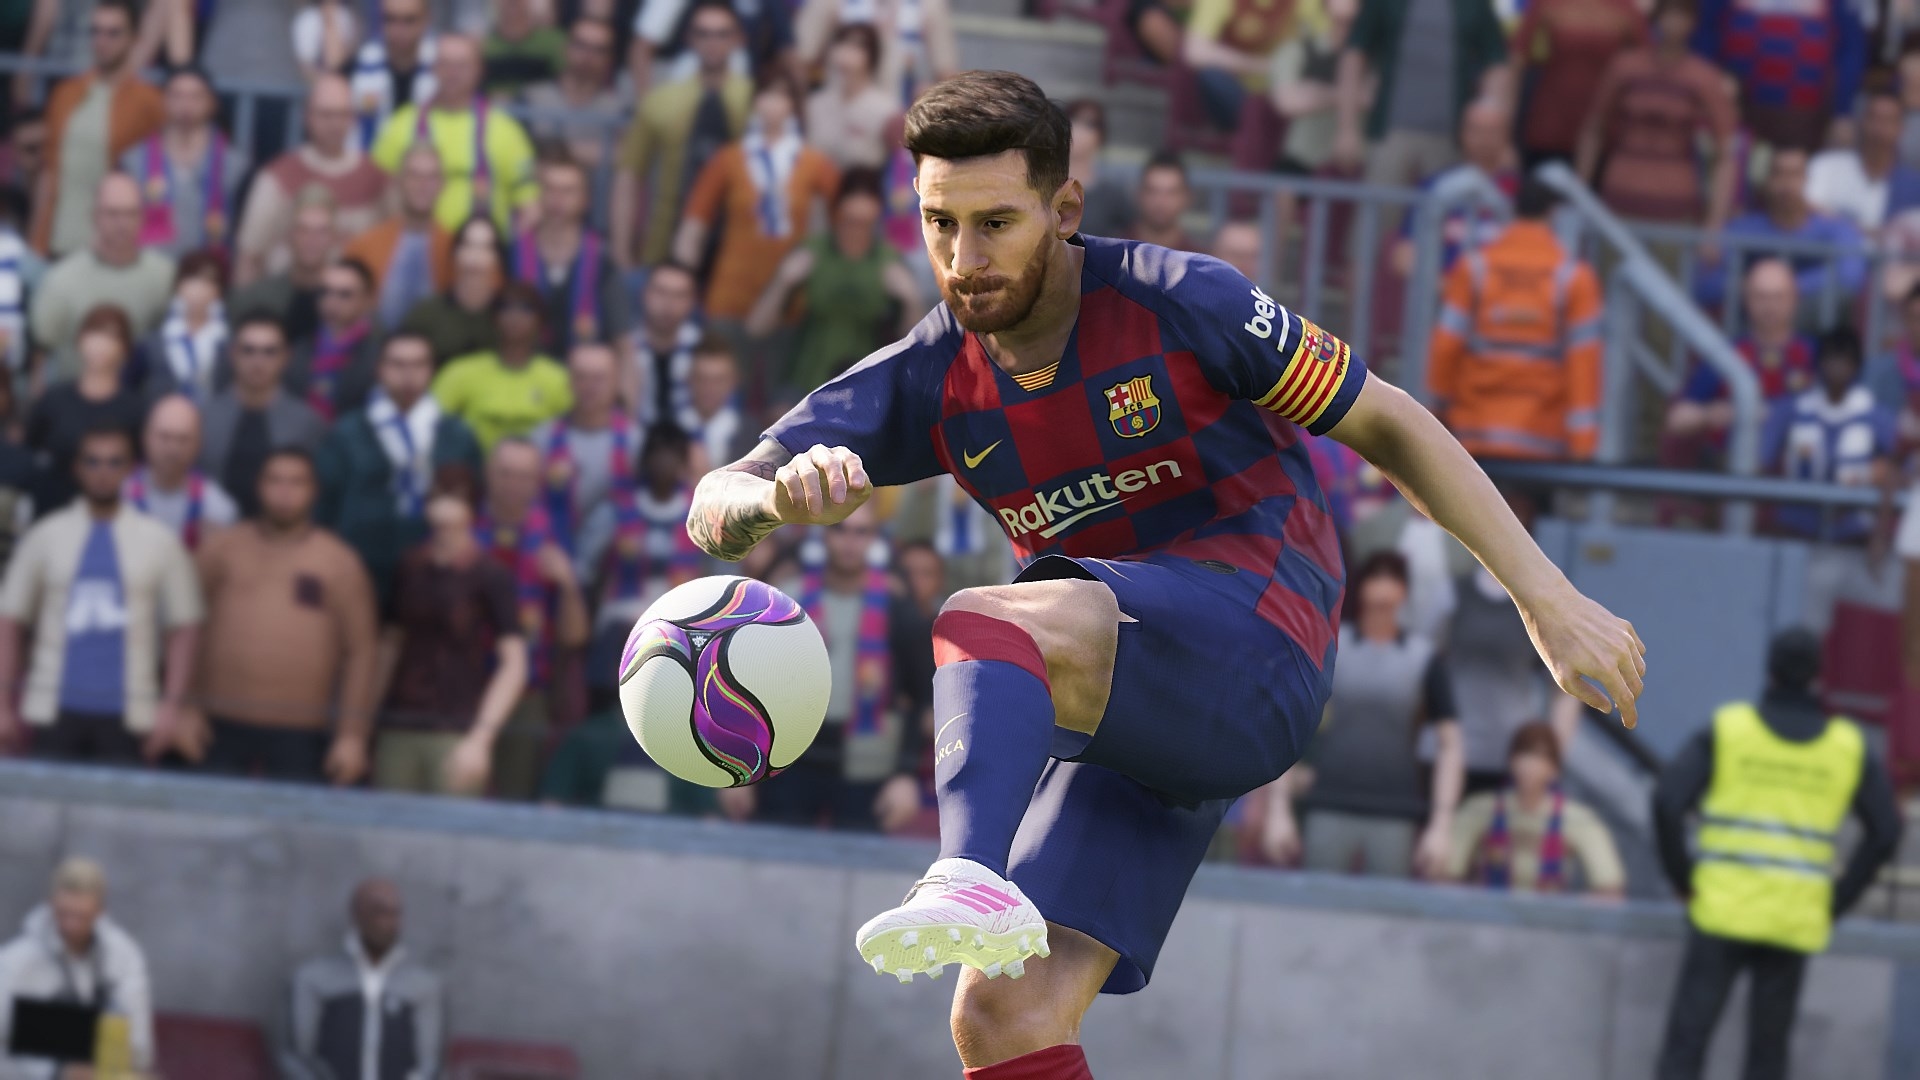 Lionel Messi In eFootball PES 2020 Wallpaper, HD Games 4K ...